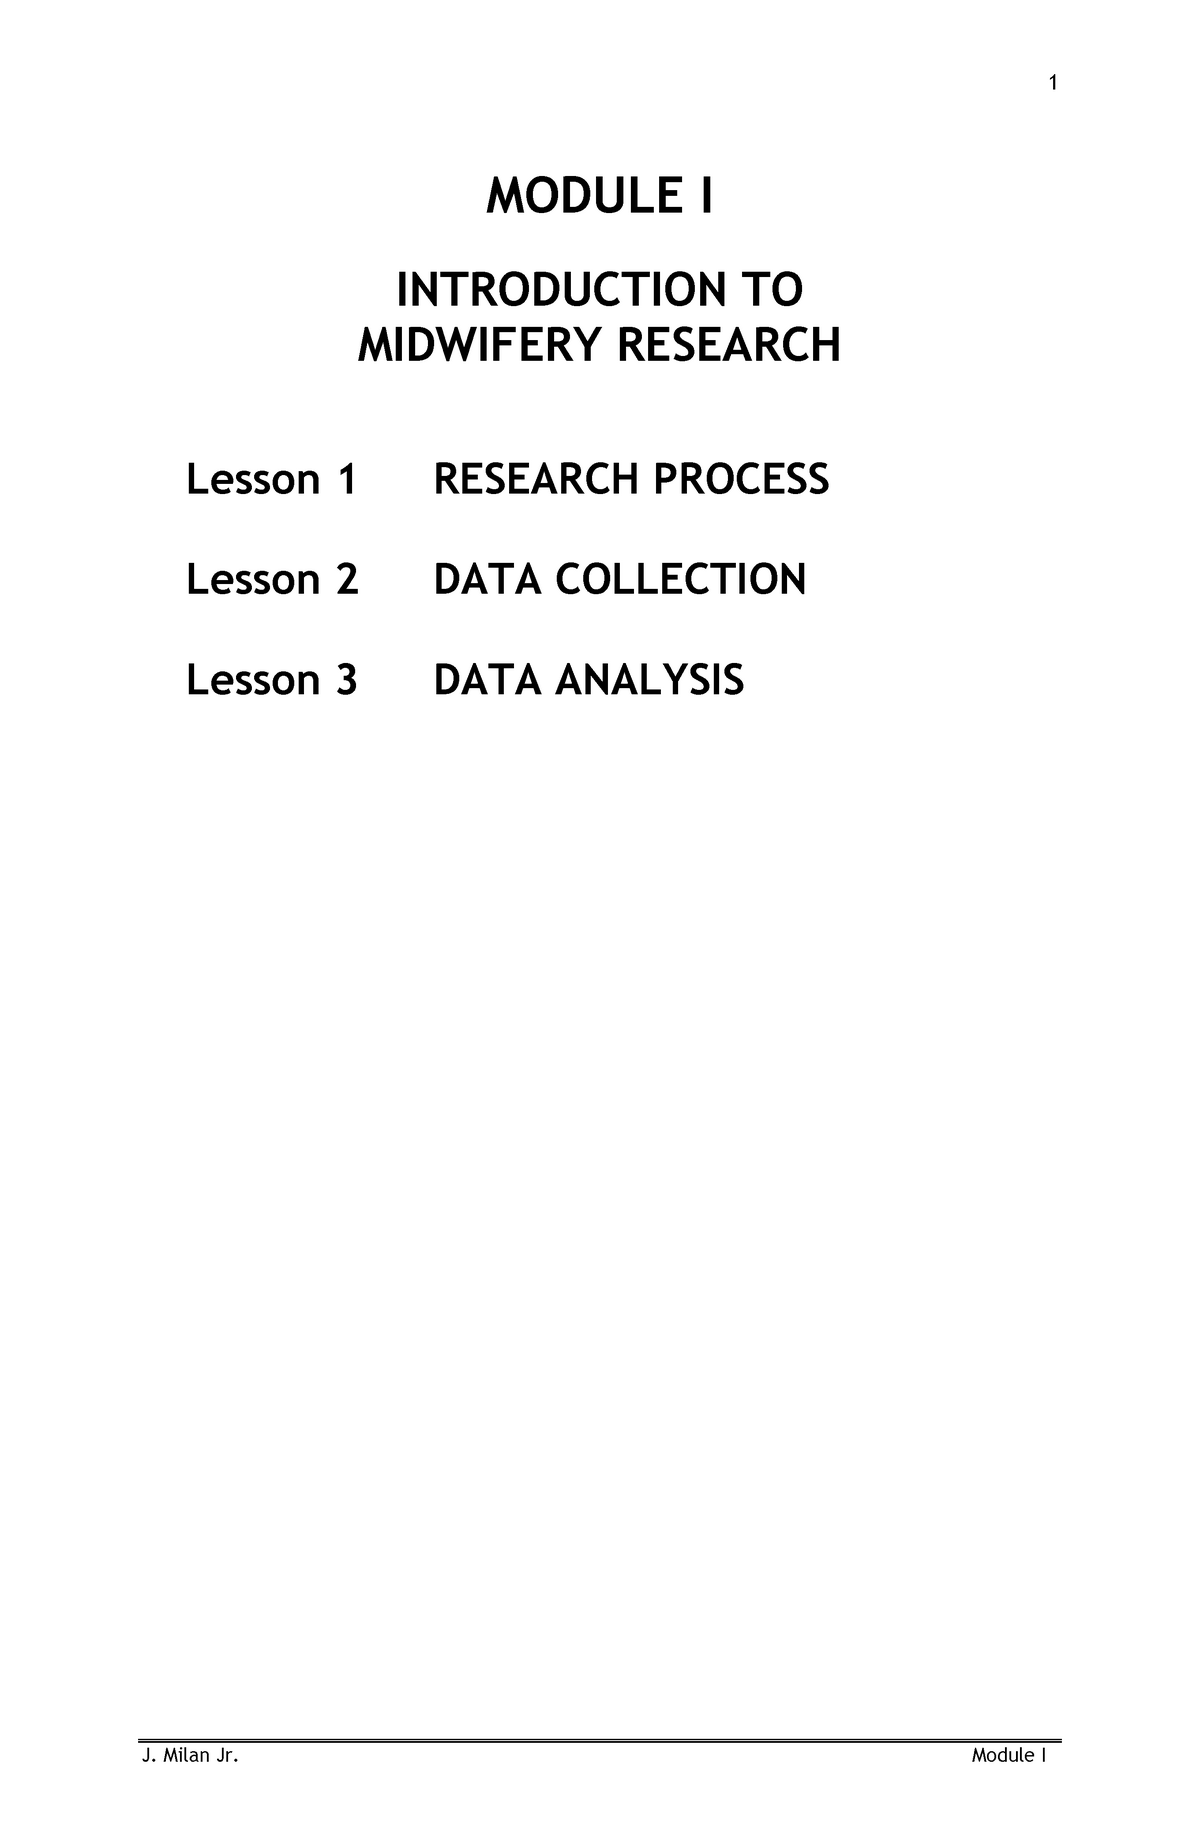 research topic in nursing and midwifery